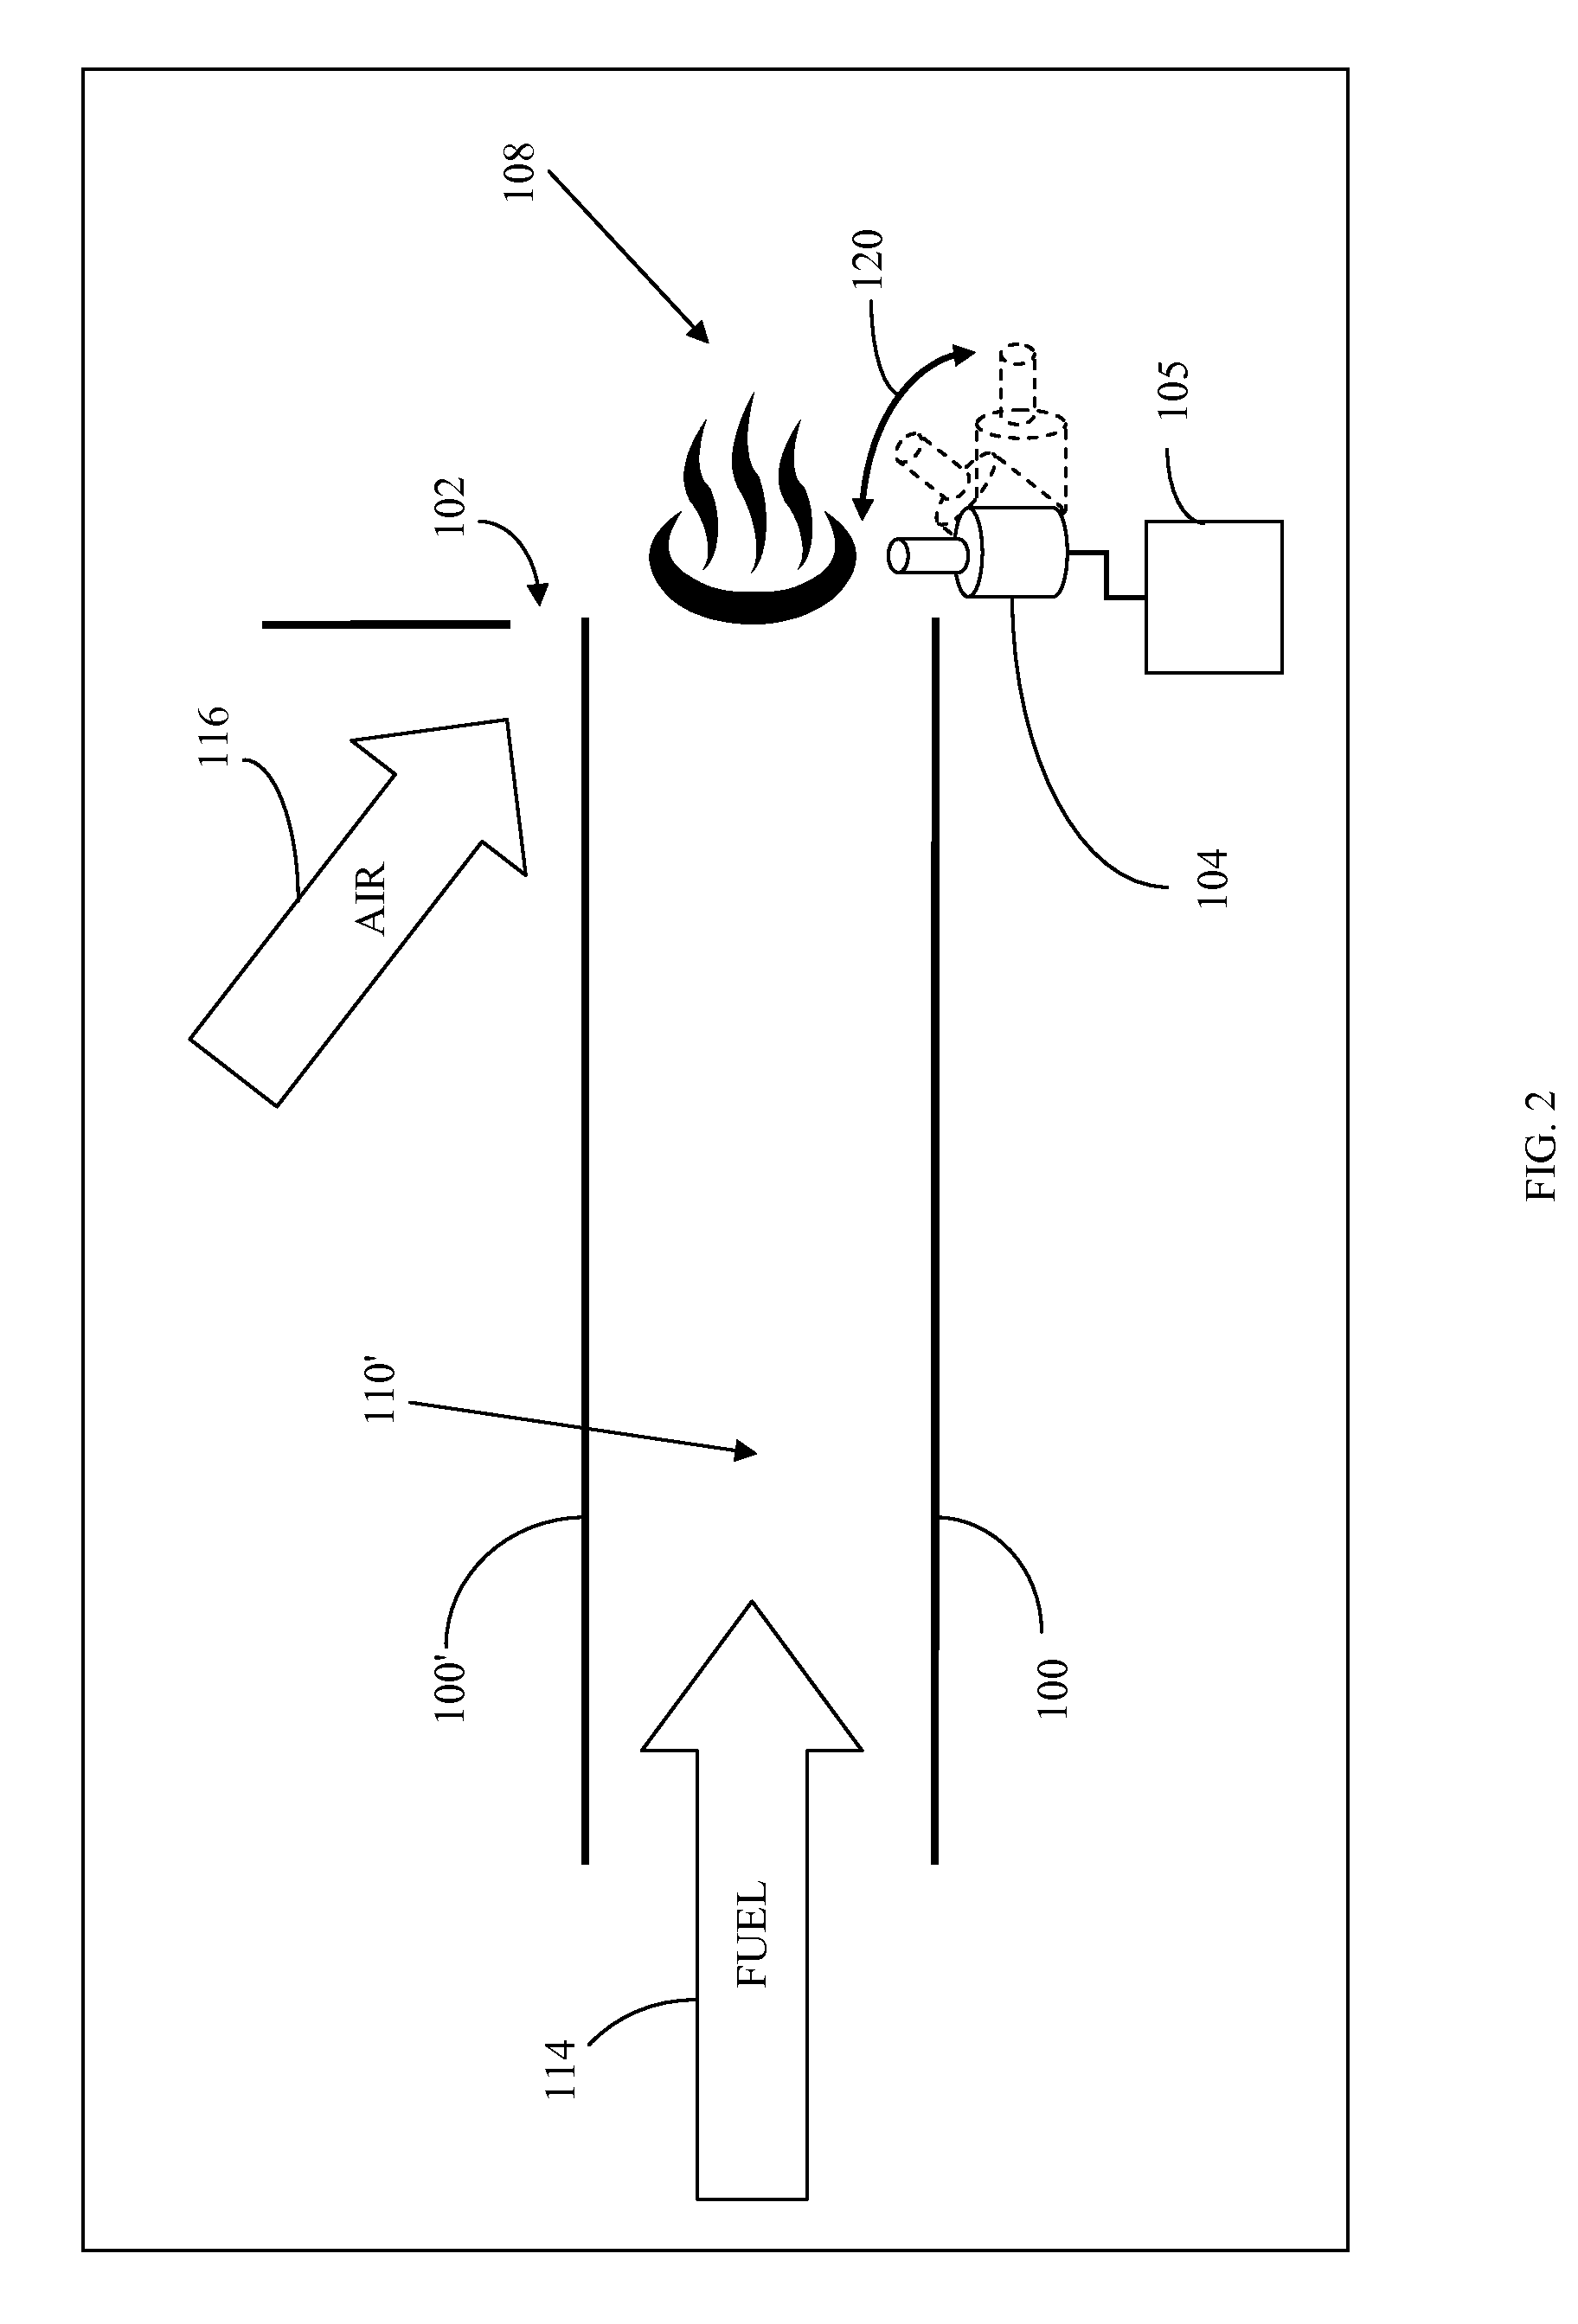 Hot Surface Igniter With Fuel Assist